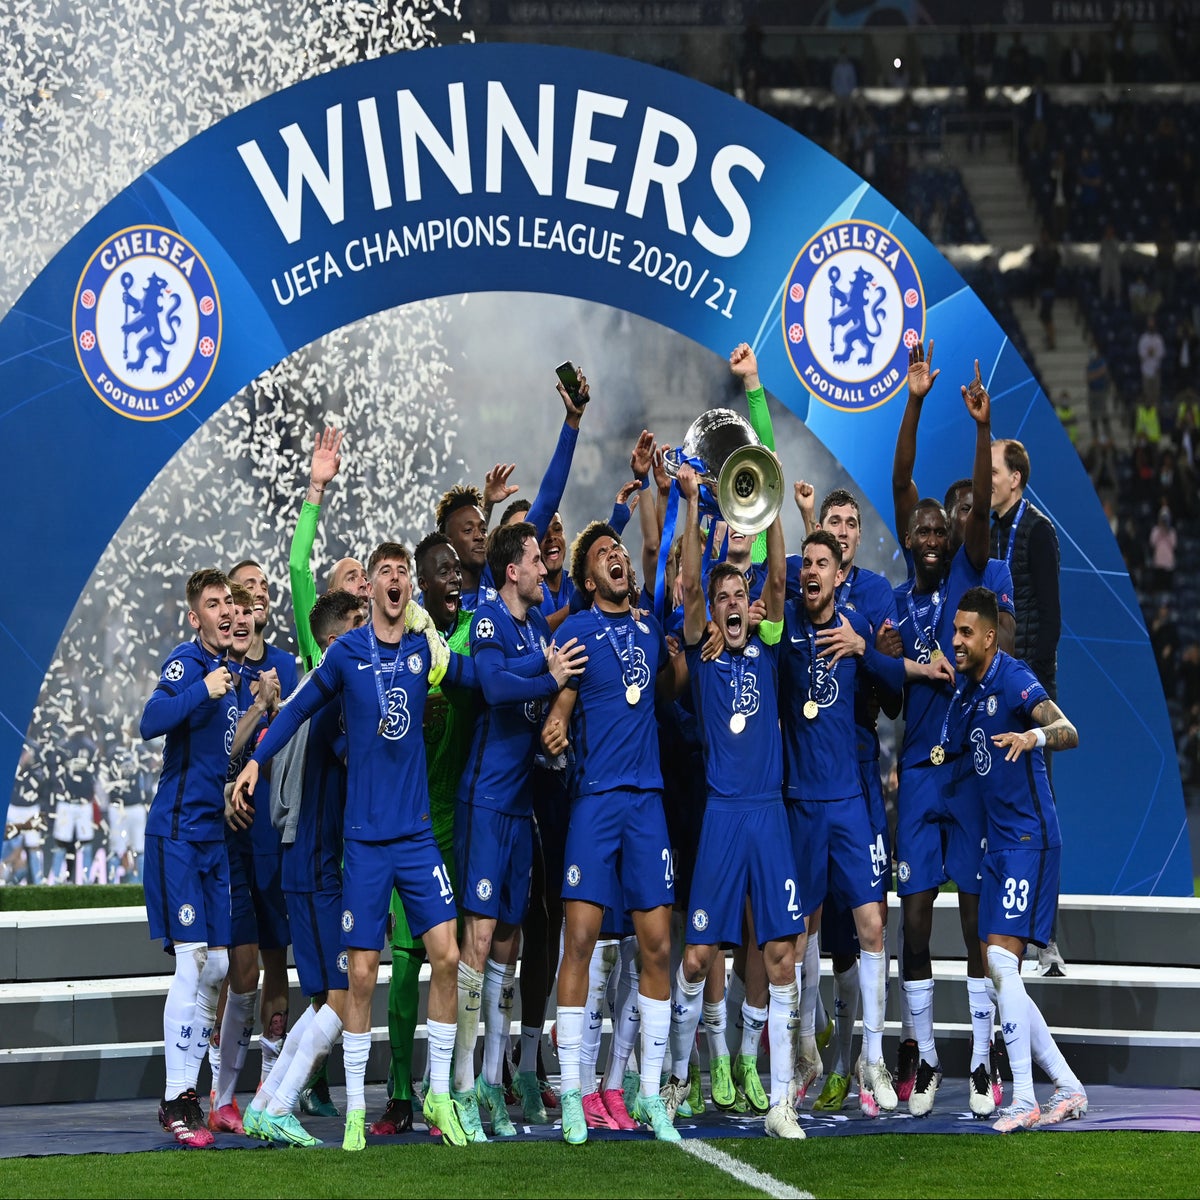 Champions League Final: Chelsea Beats Manchester City - The New York Times